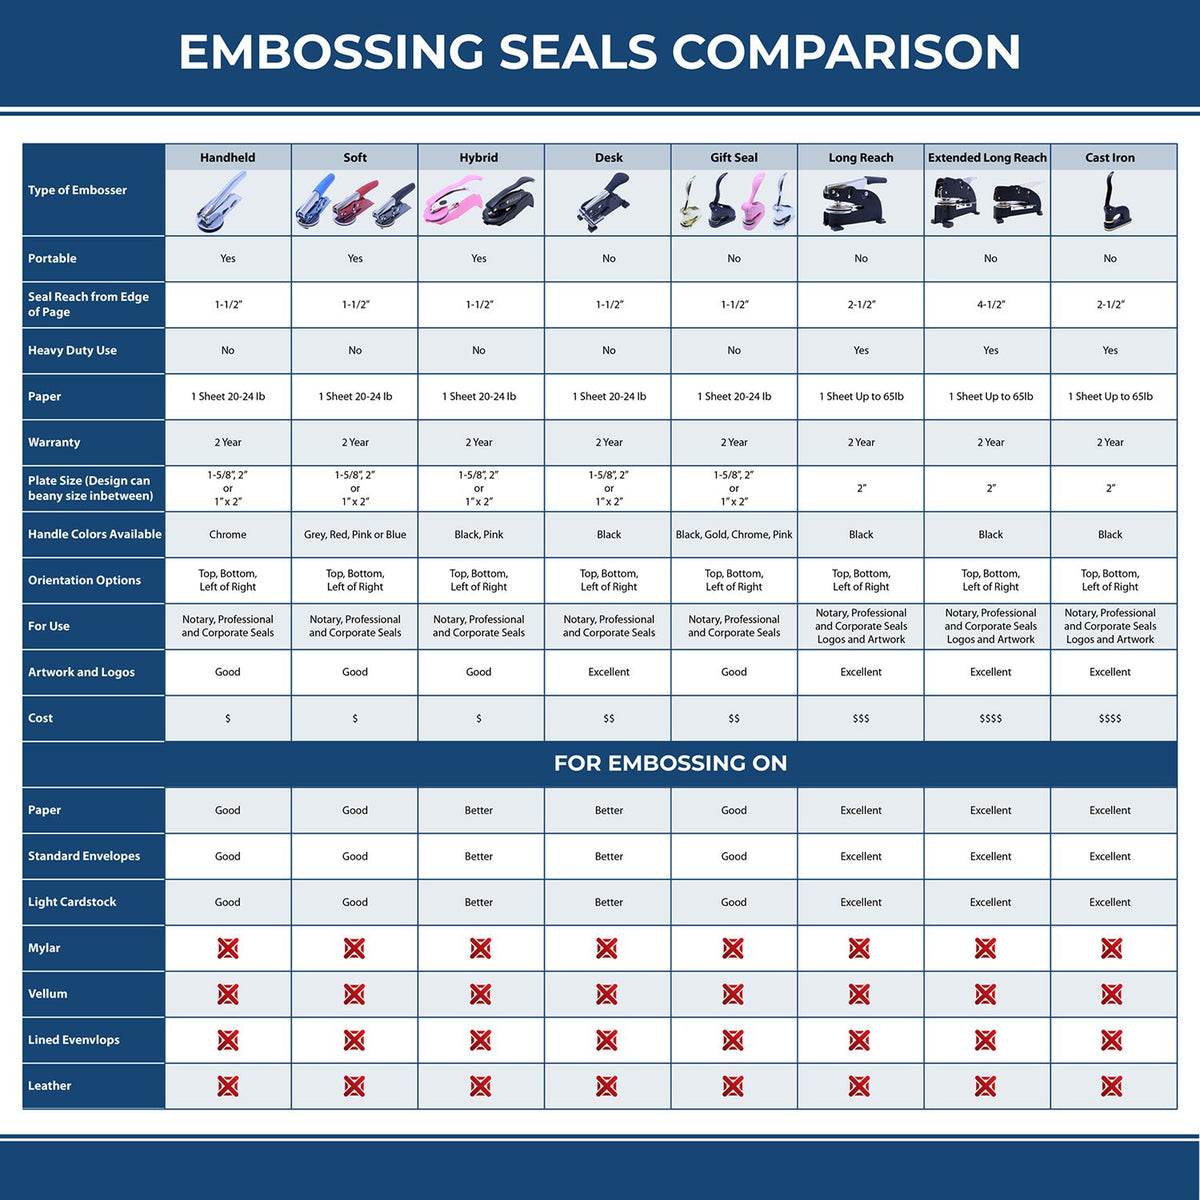 A comparison chart for the different types of mount models available for the Heavy Duty Cast Iron New York Geologist Seal Embosser